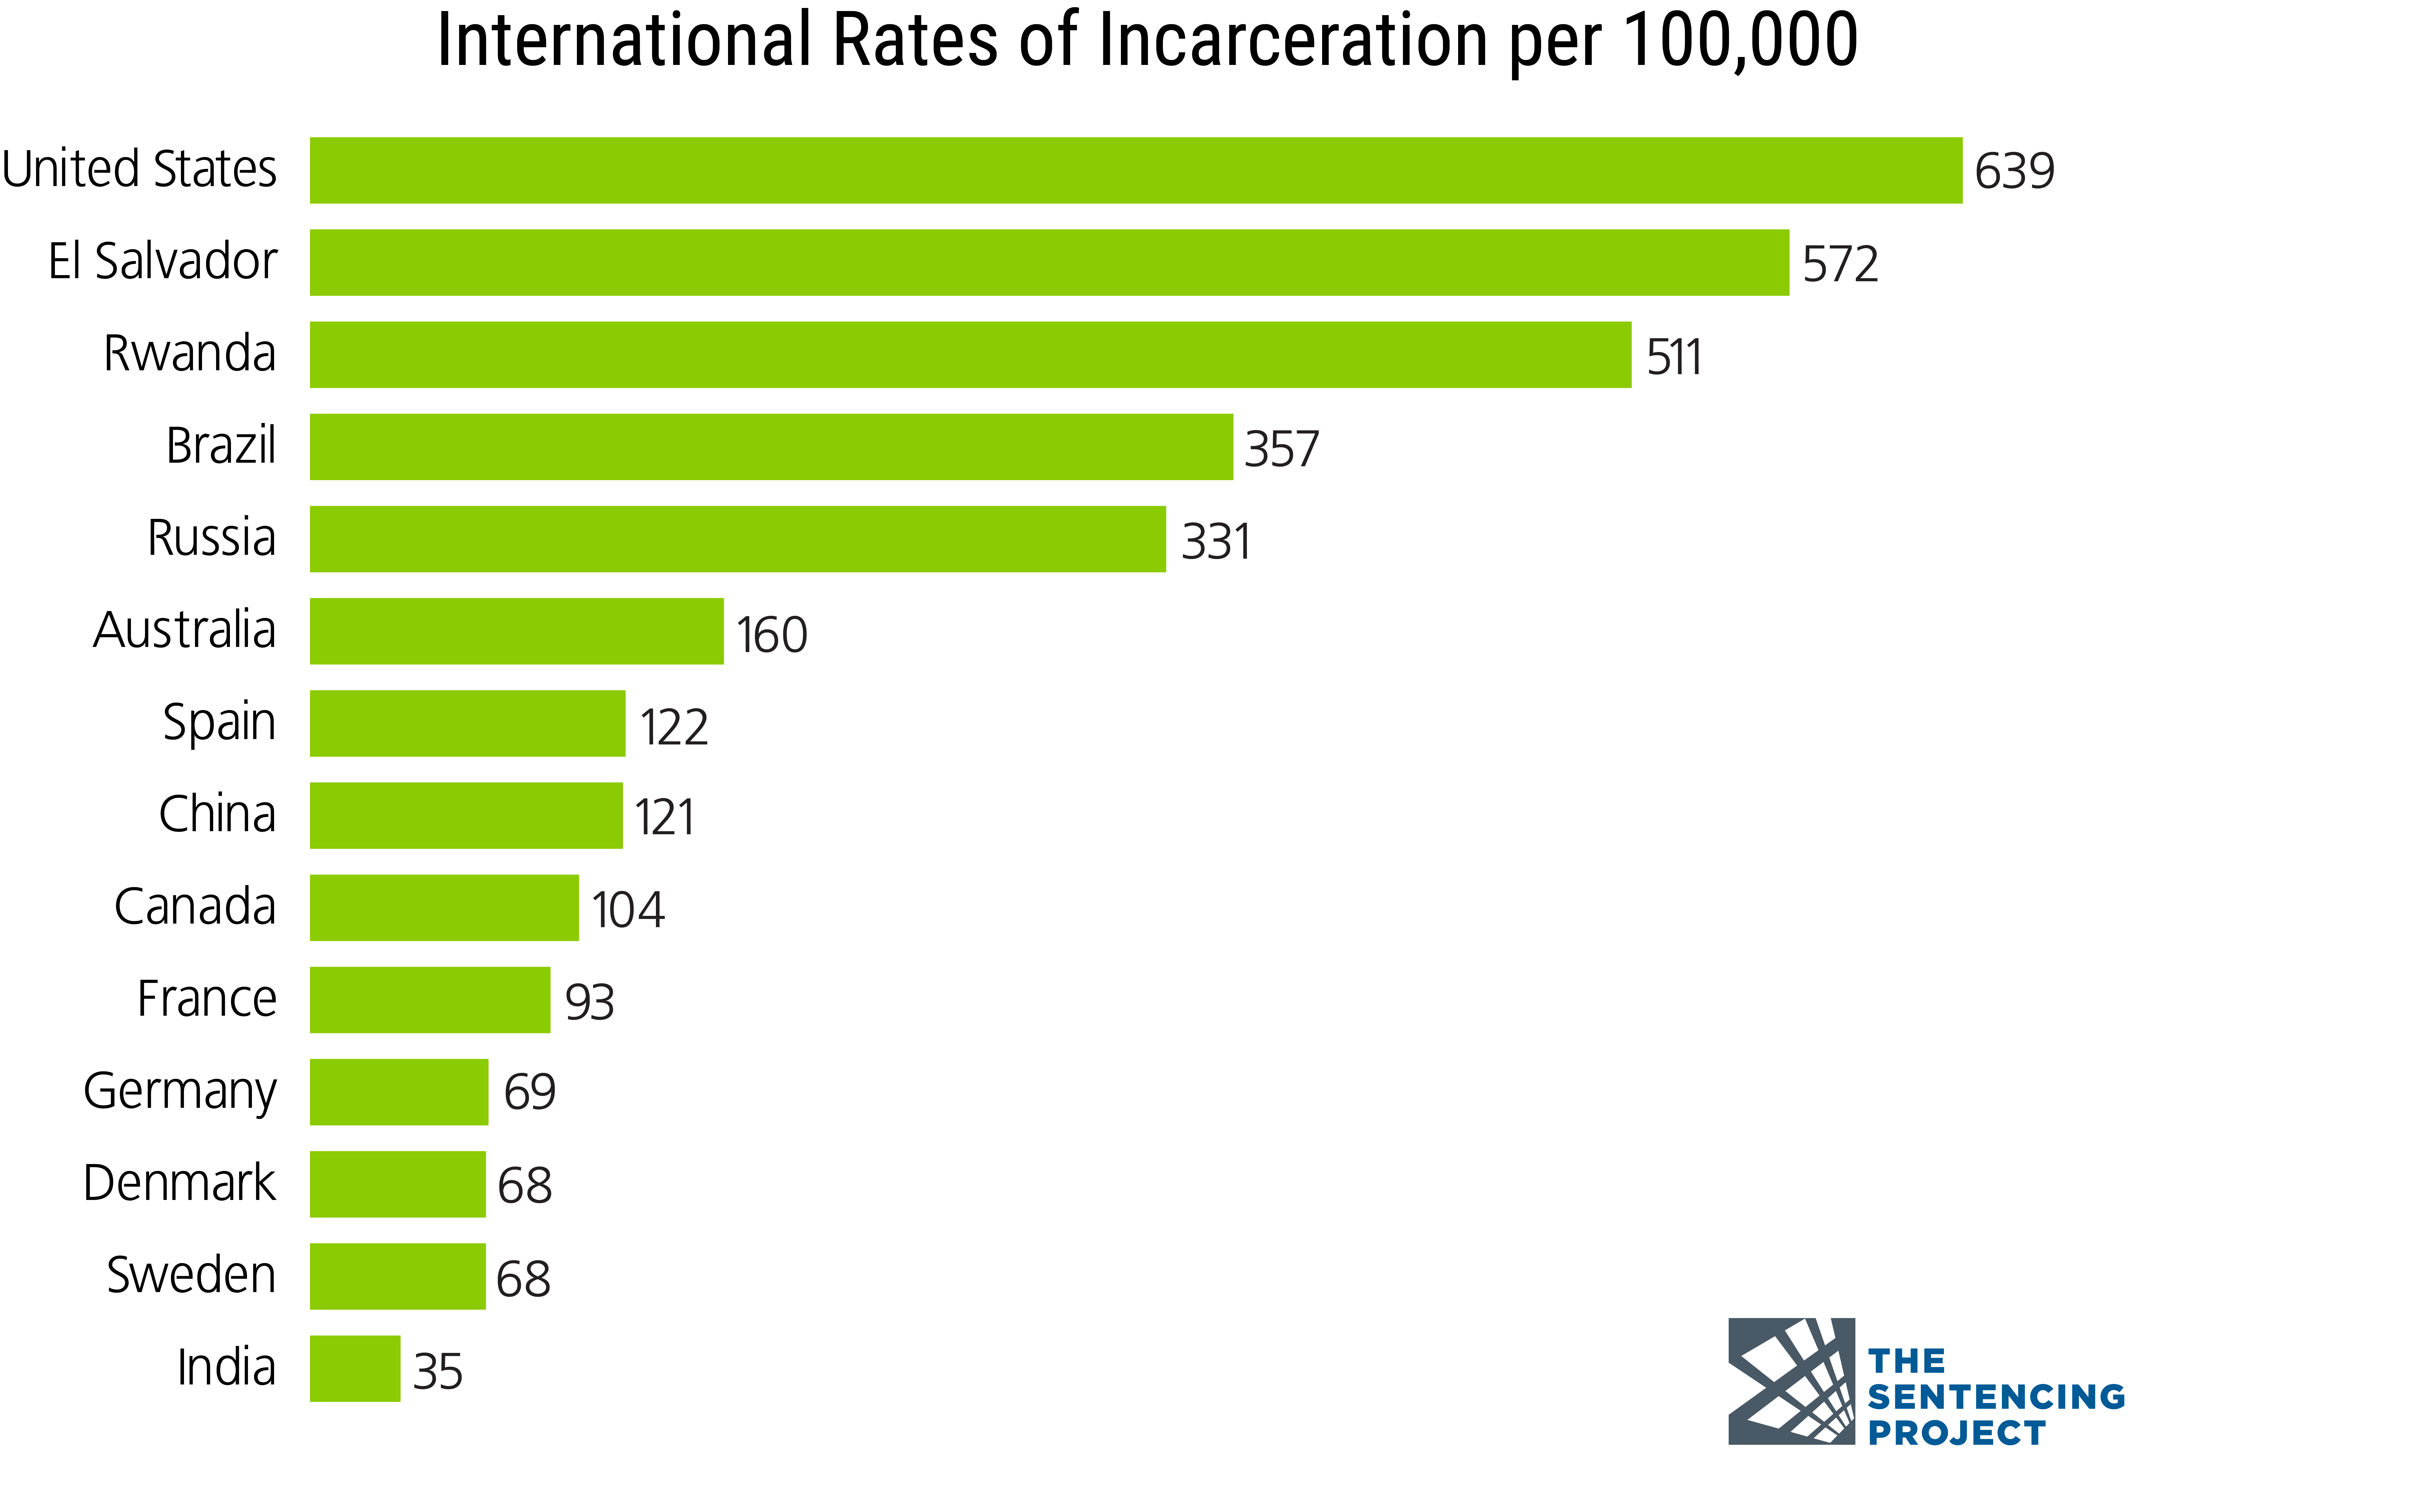 A chart of the International Rates of Incarceration for 100,000 in 2019.